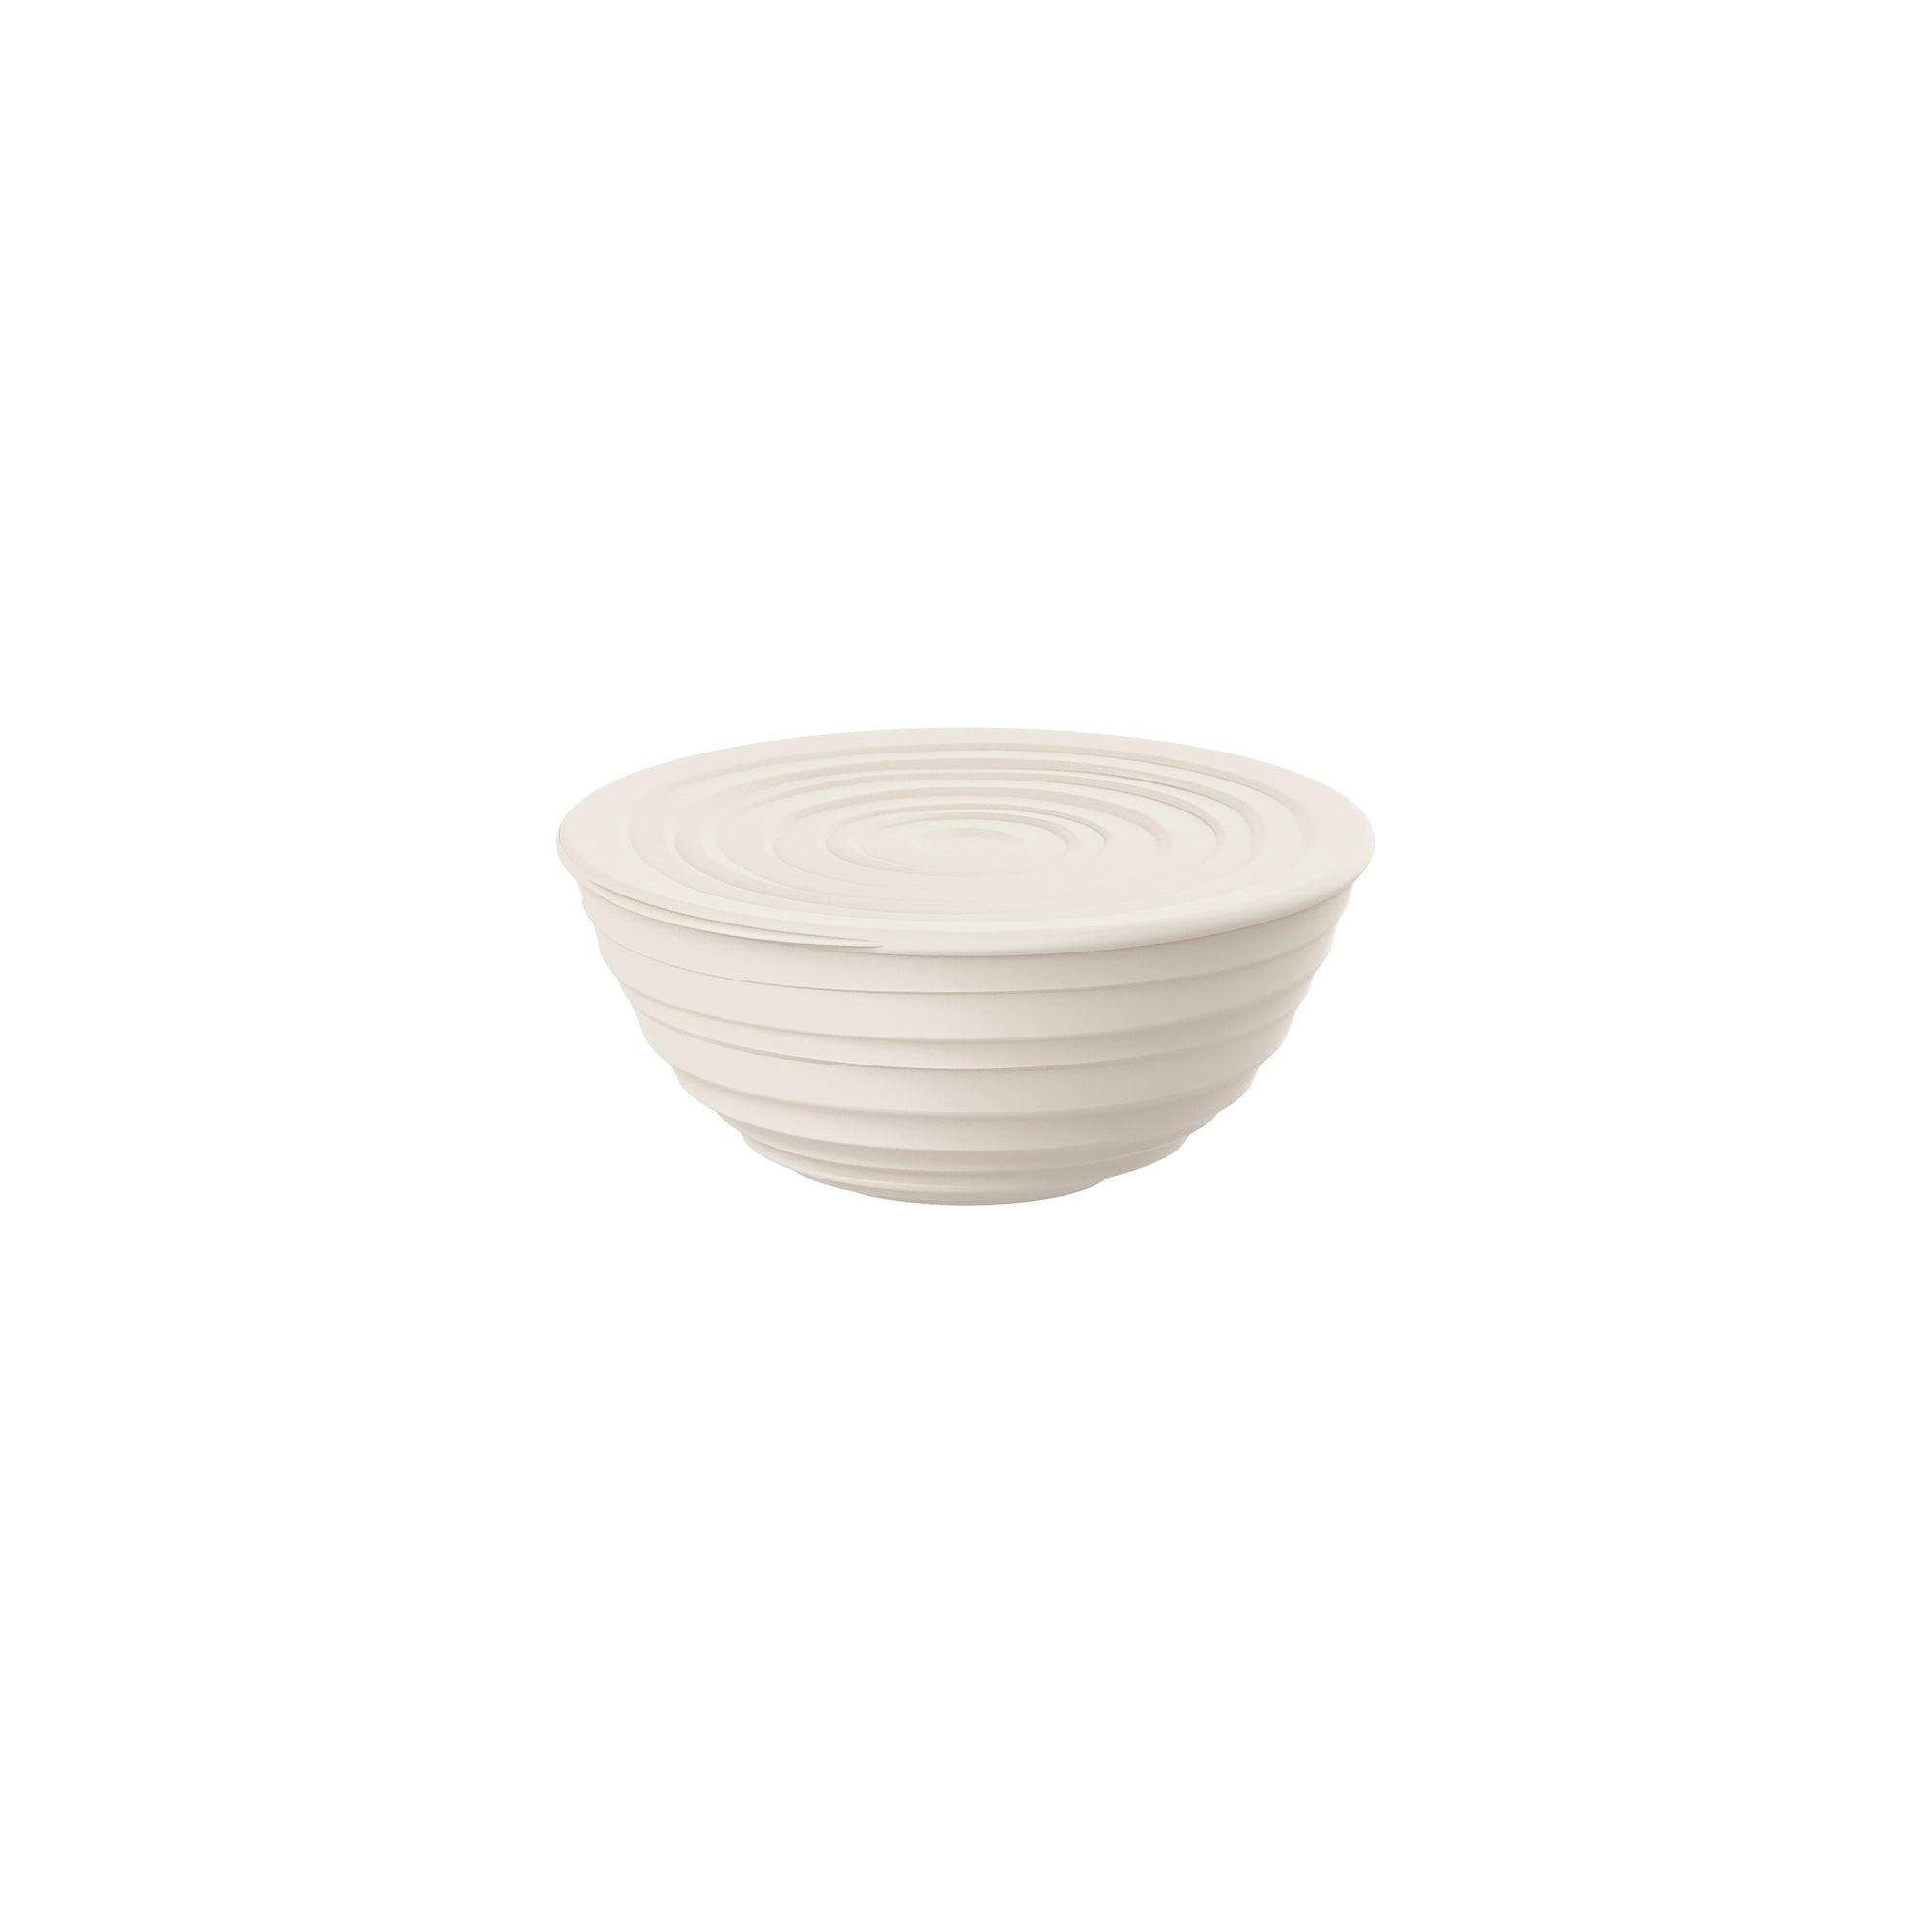 BOWL WITH LID "TIERRA"